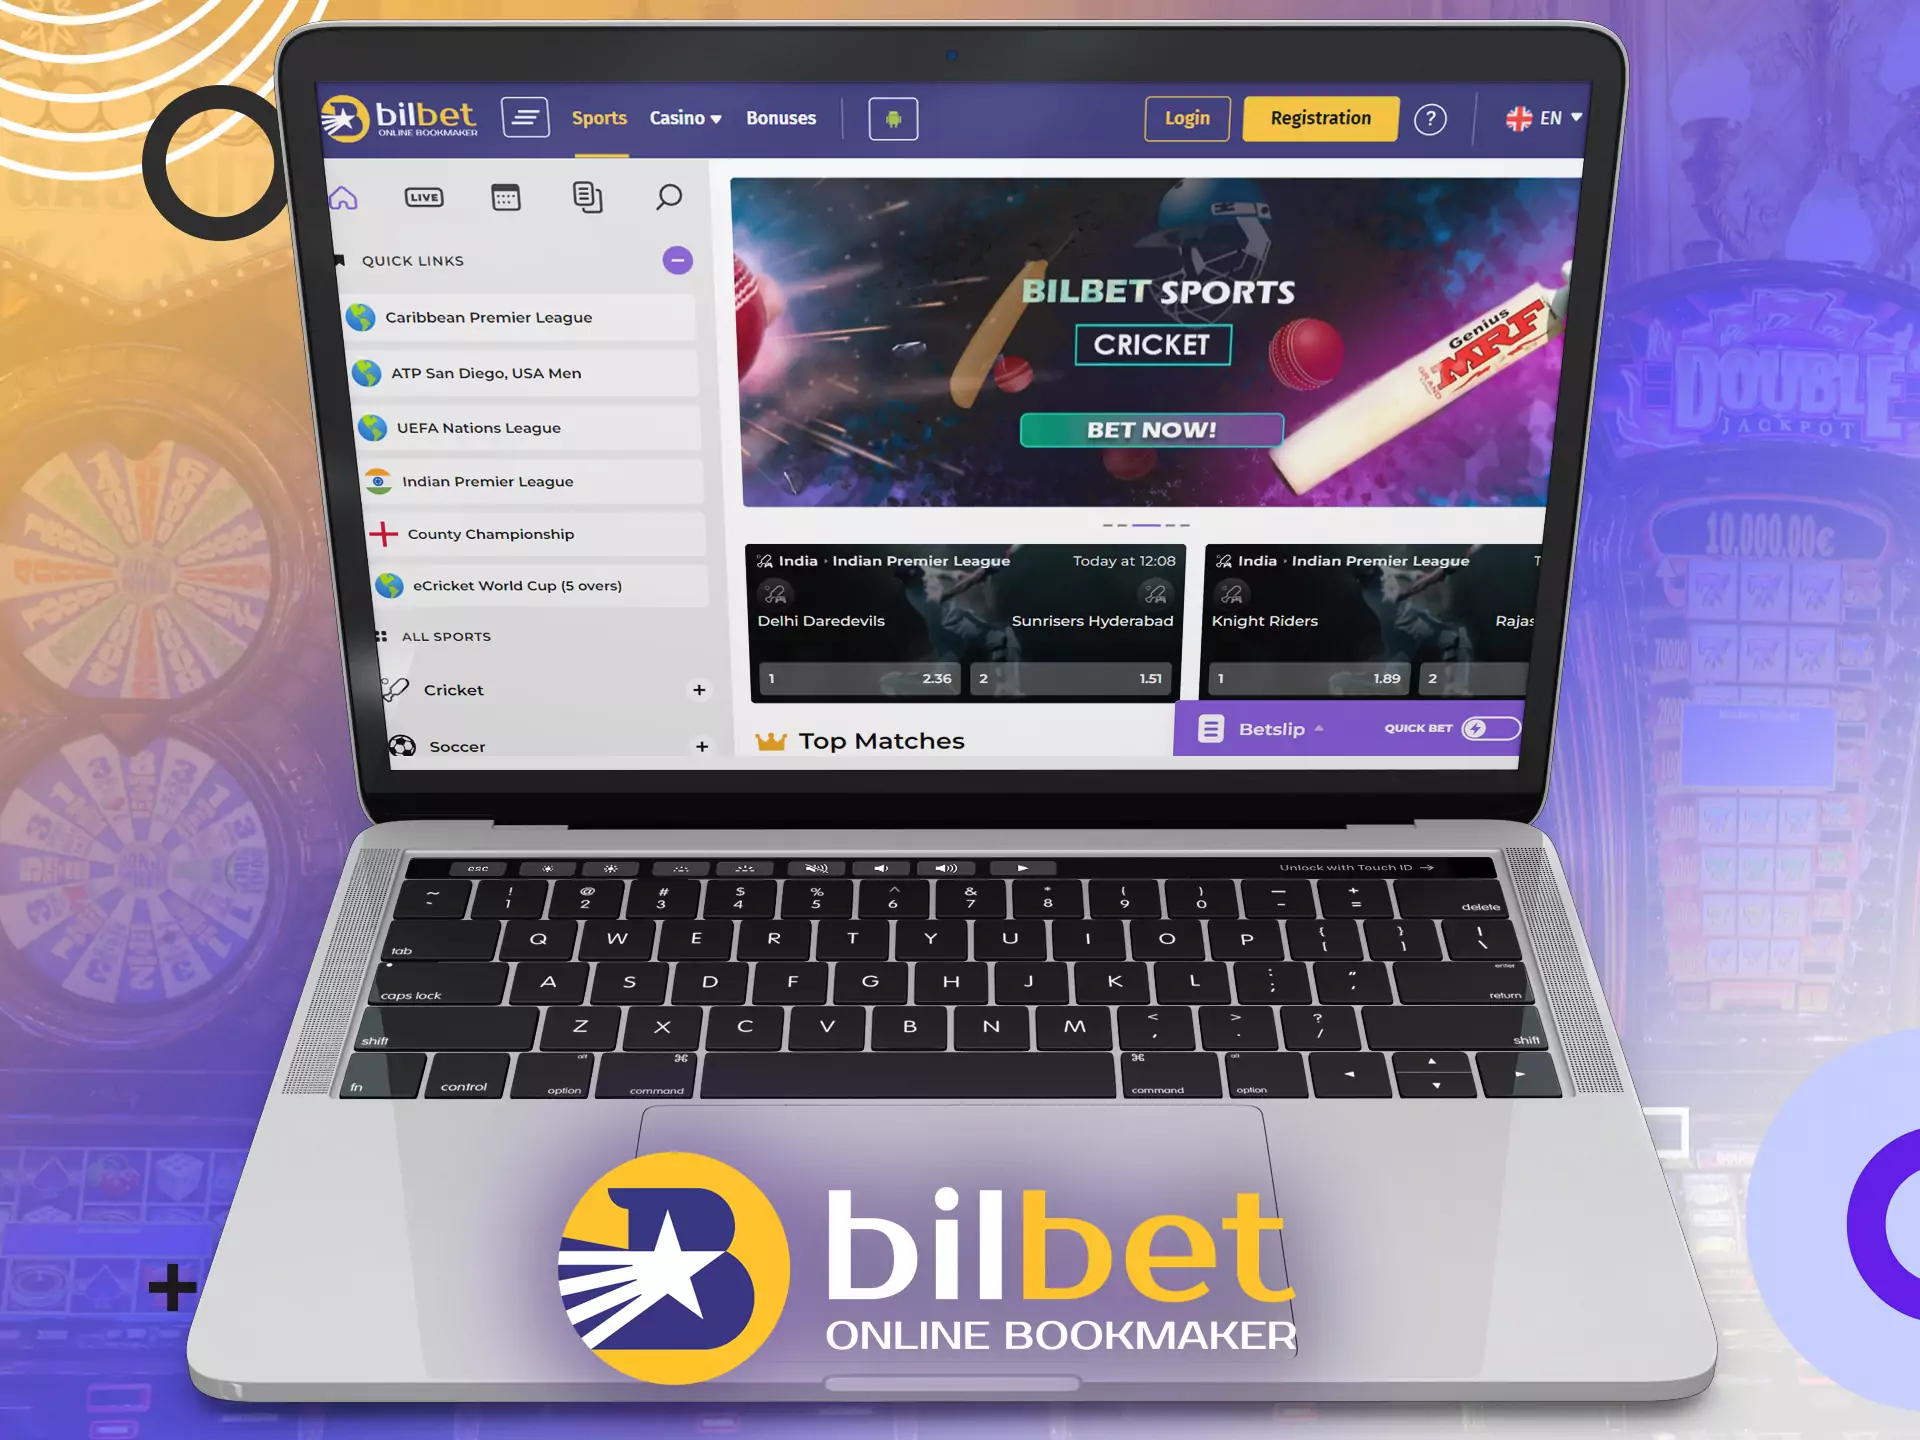 For PC, use the official website of Bilbet.